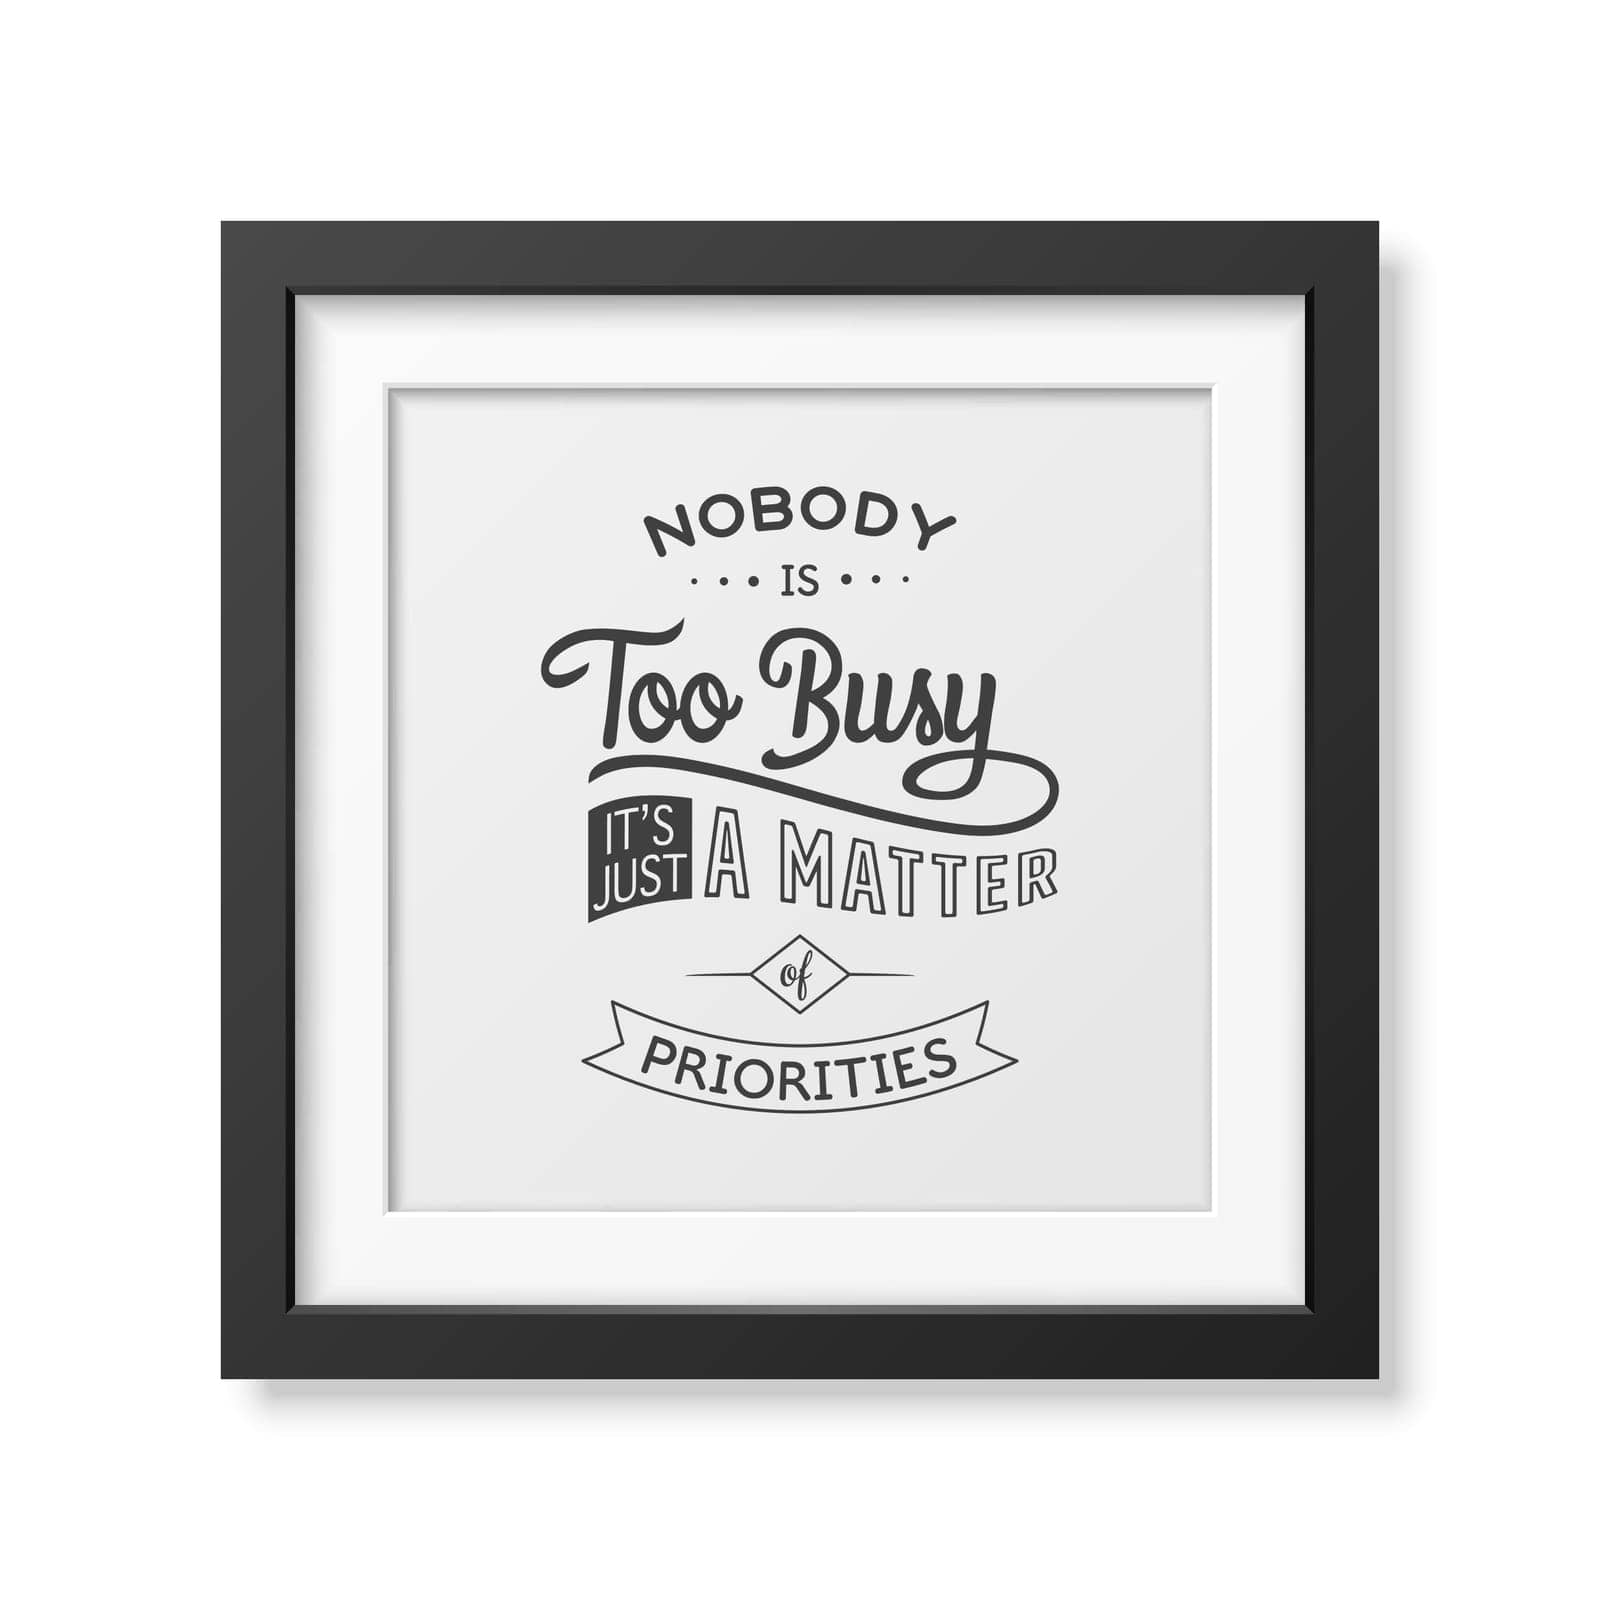 Nobody is too busy, it is just a matter of priorities - Quote typographical background in the realistic square black frame isolated on white background. Vector EPS10 illustration.